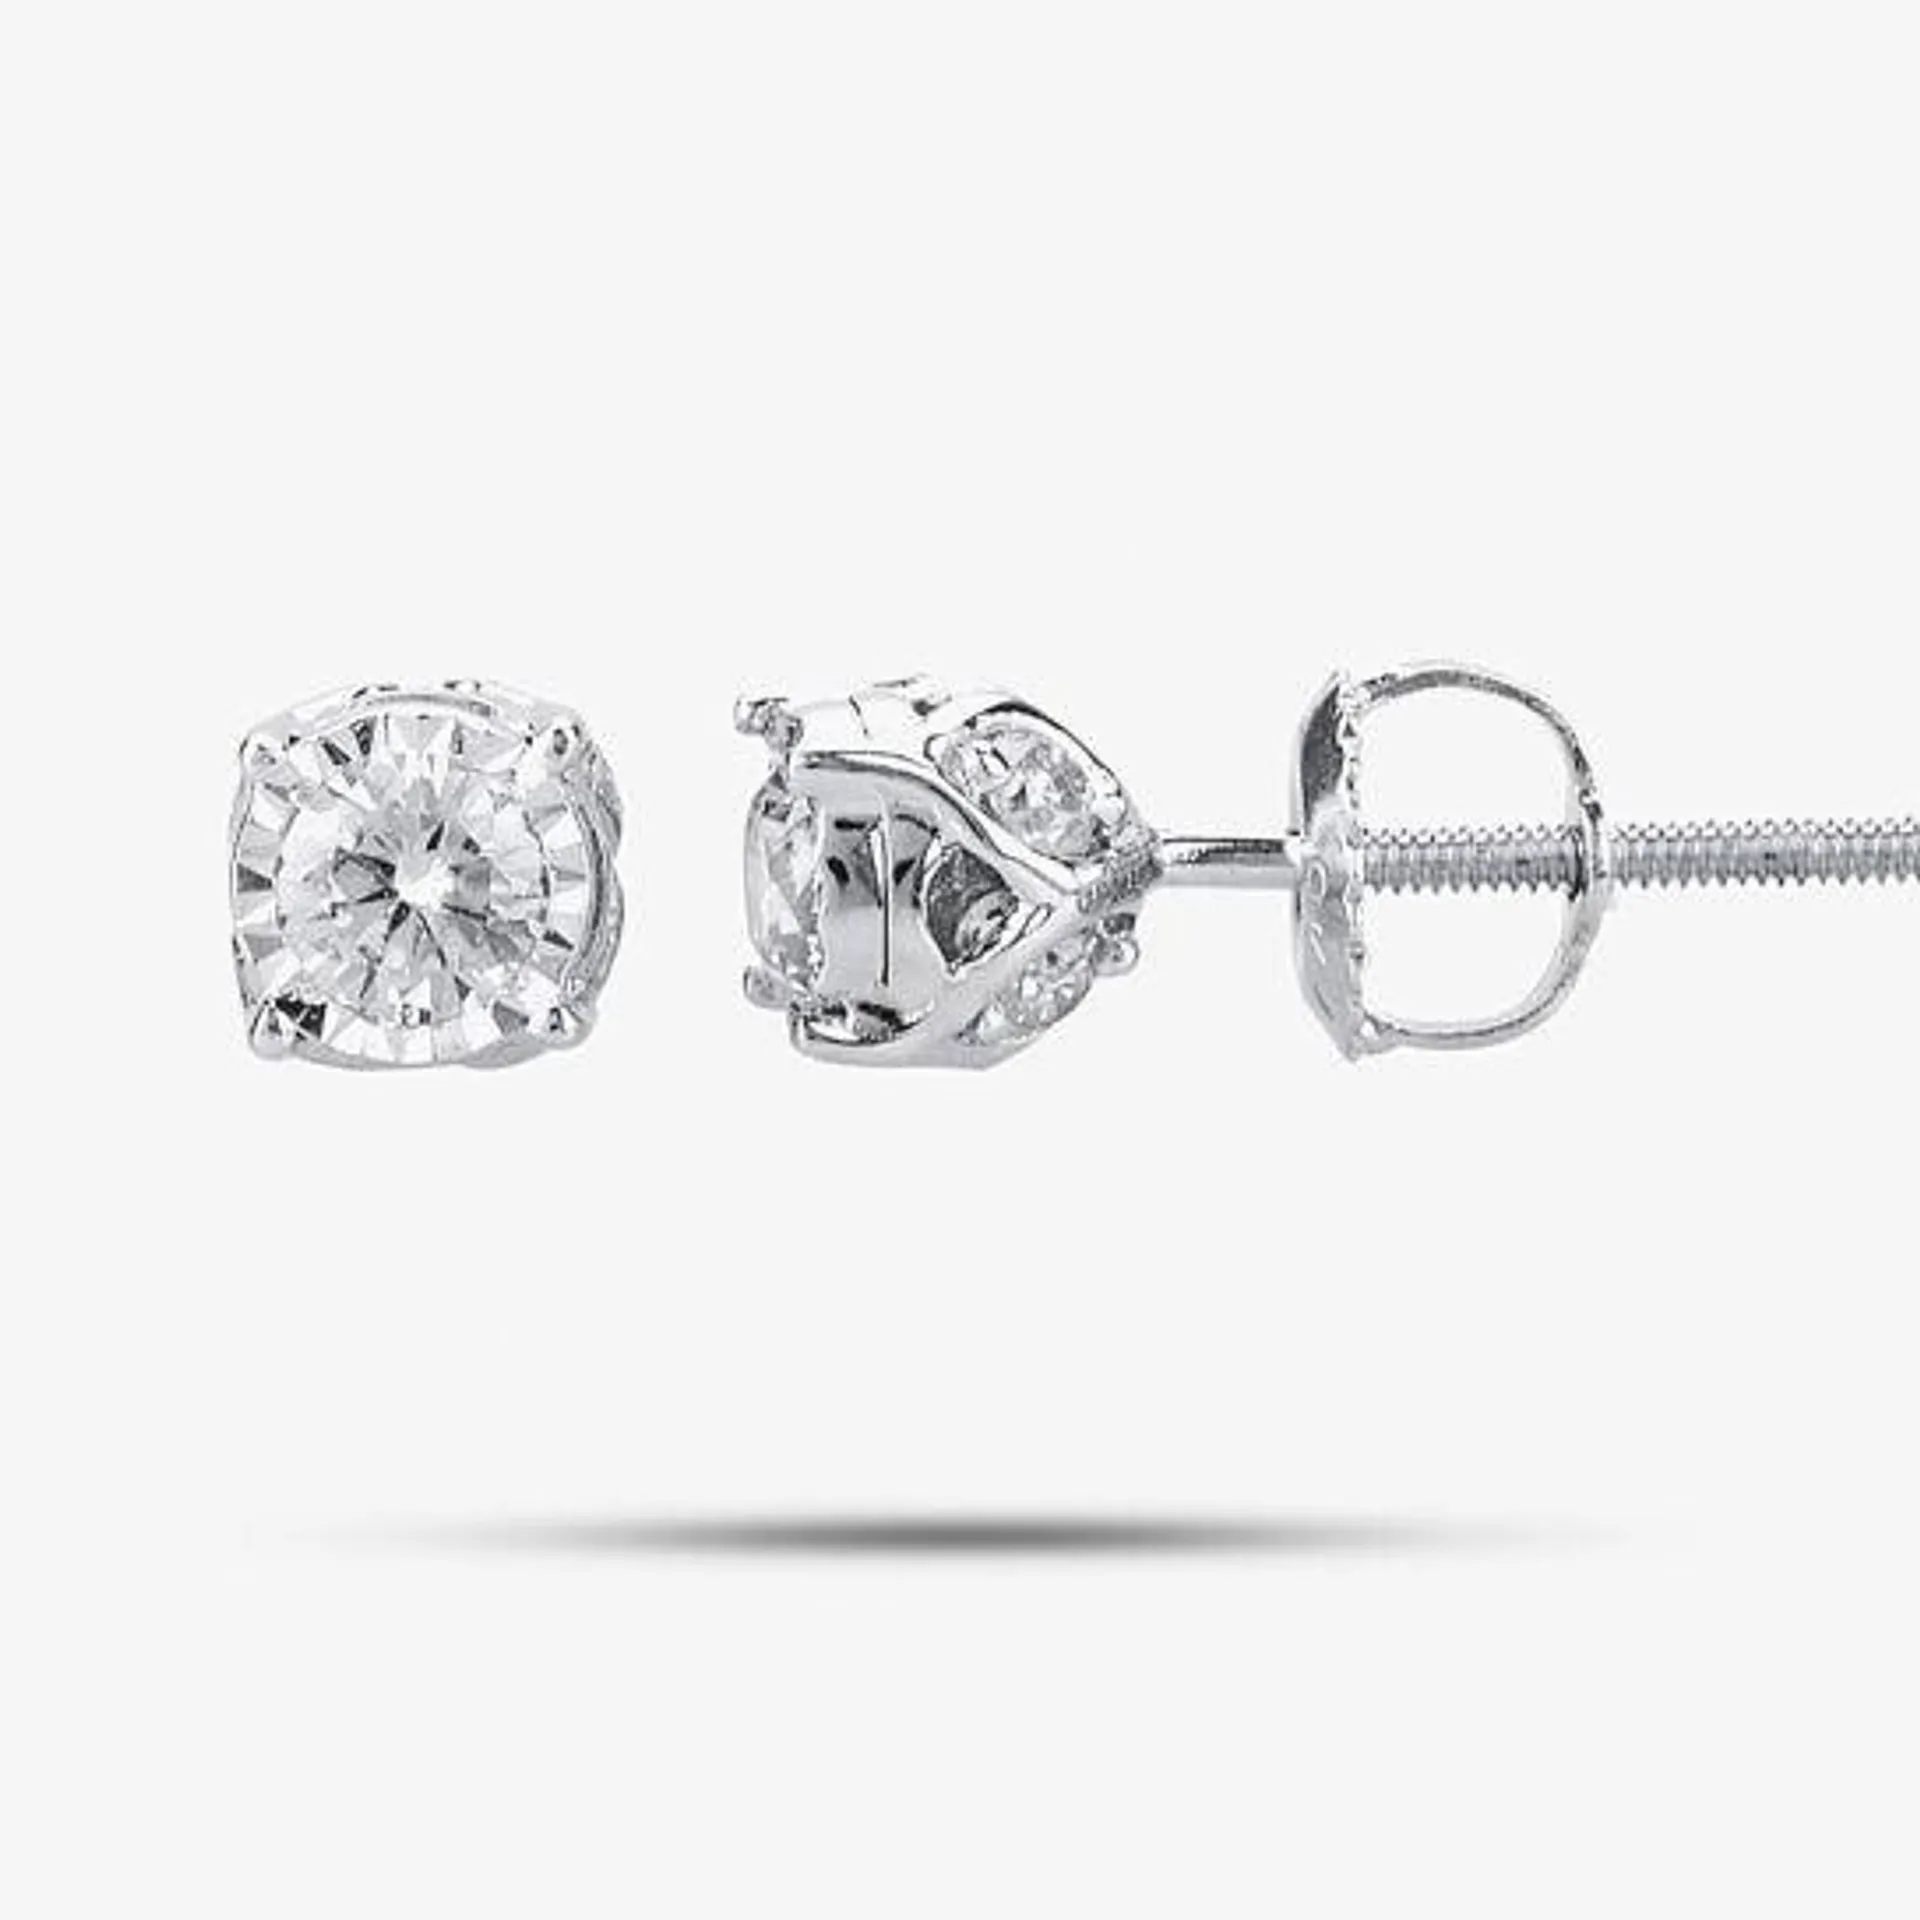 9ct White Gold 0.50ct Four Claw Diamond Stud Earrings THE19683-50